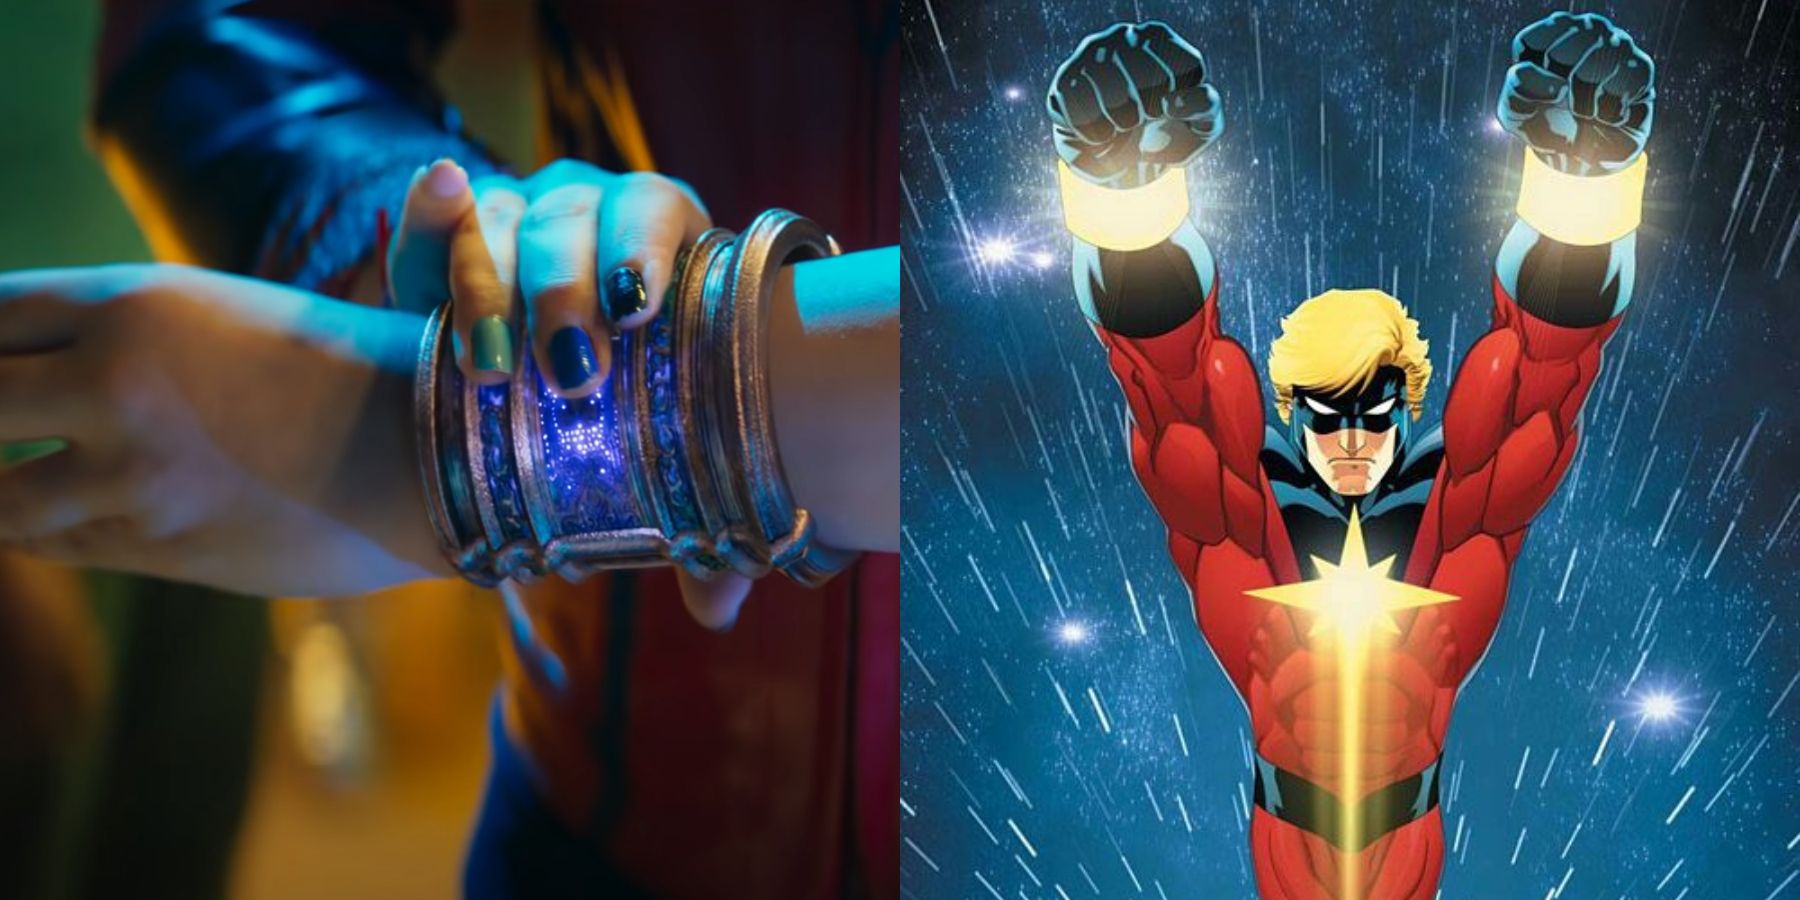 A split image depicts a glowing bracelet in the Ms Marvel trailer and Nega-Bands on Captain Marvel in Marvel comics